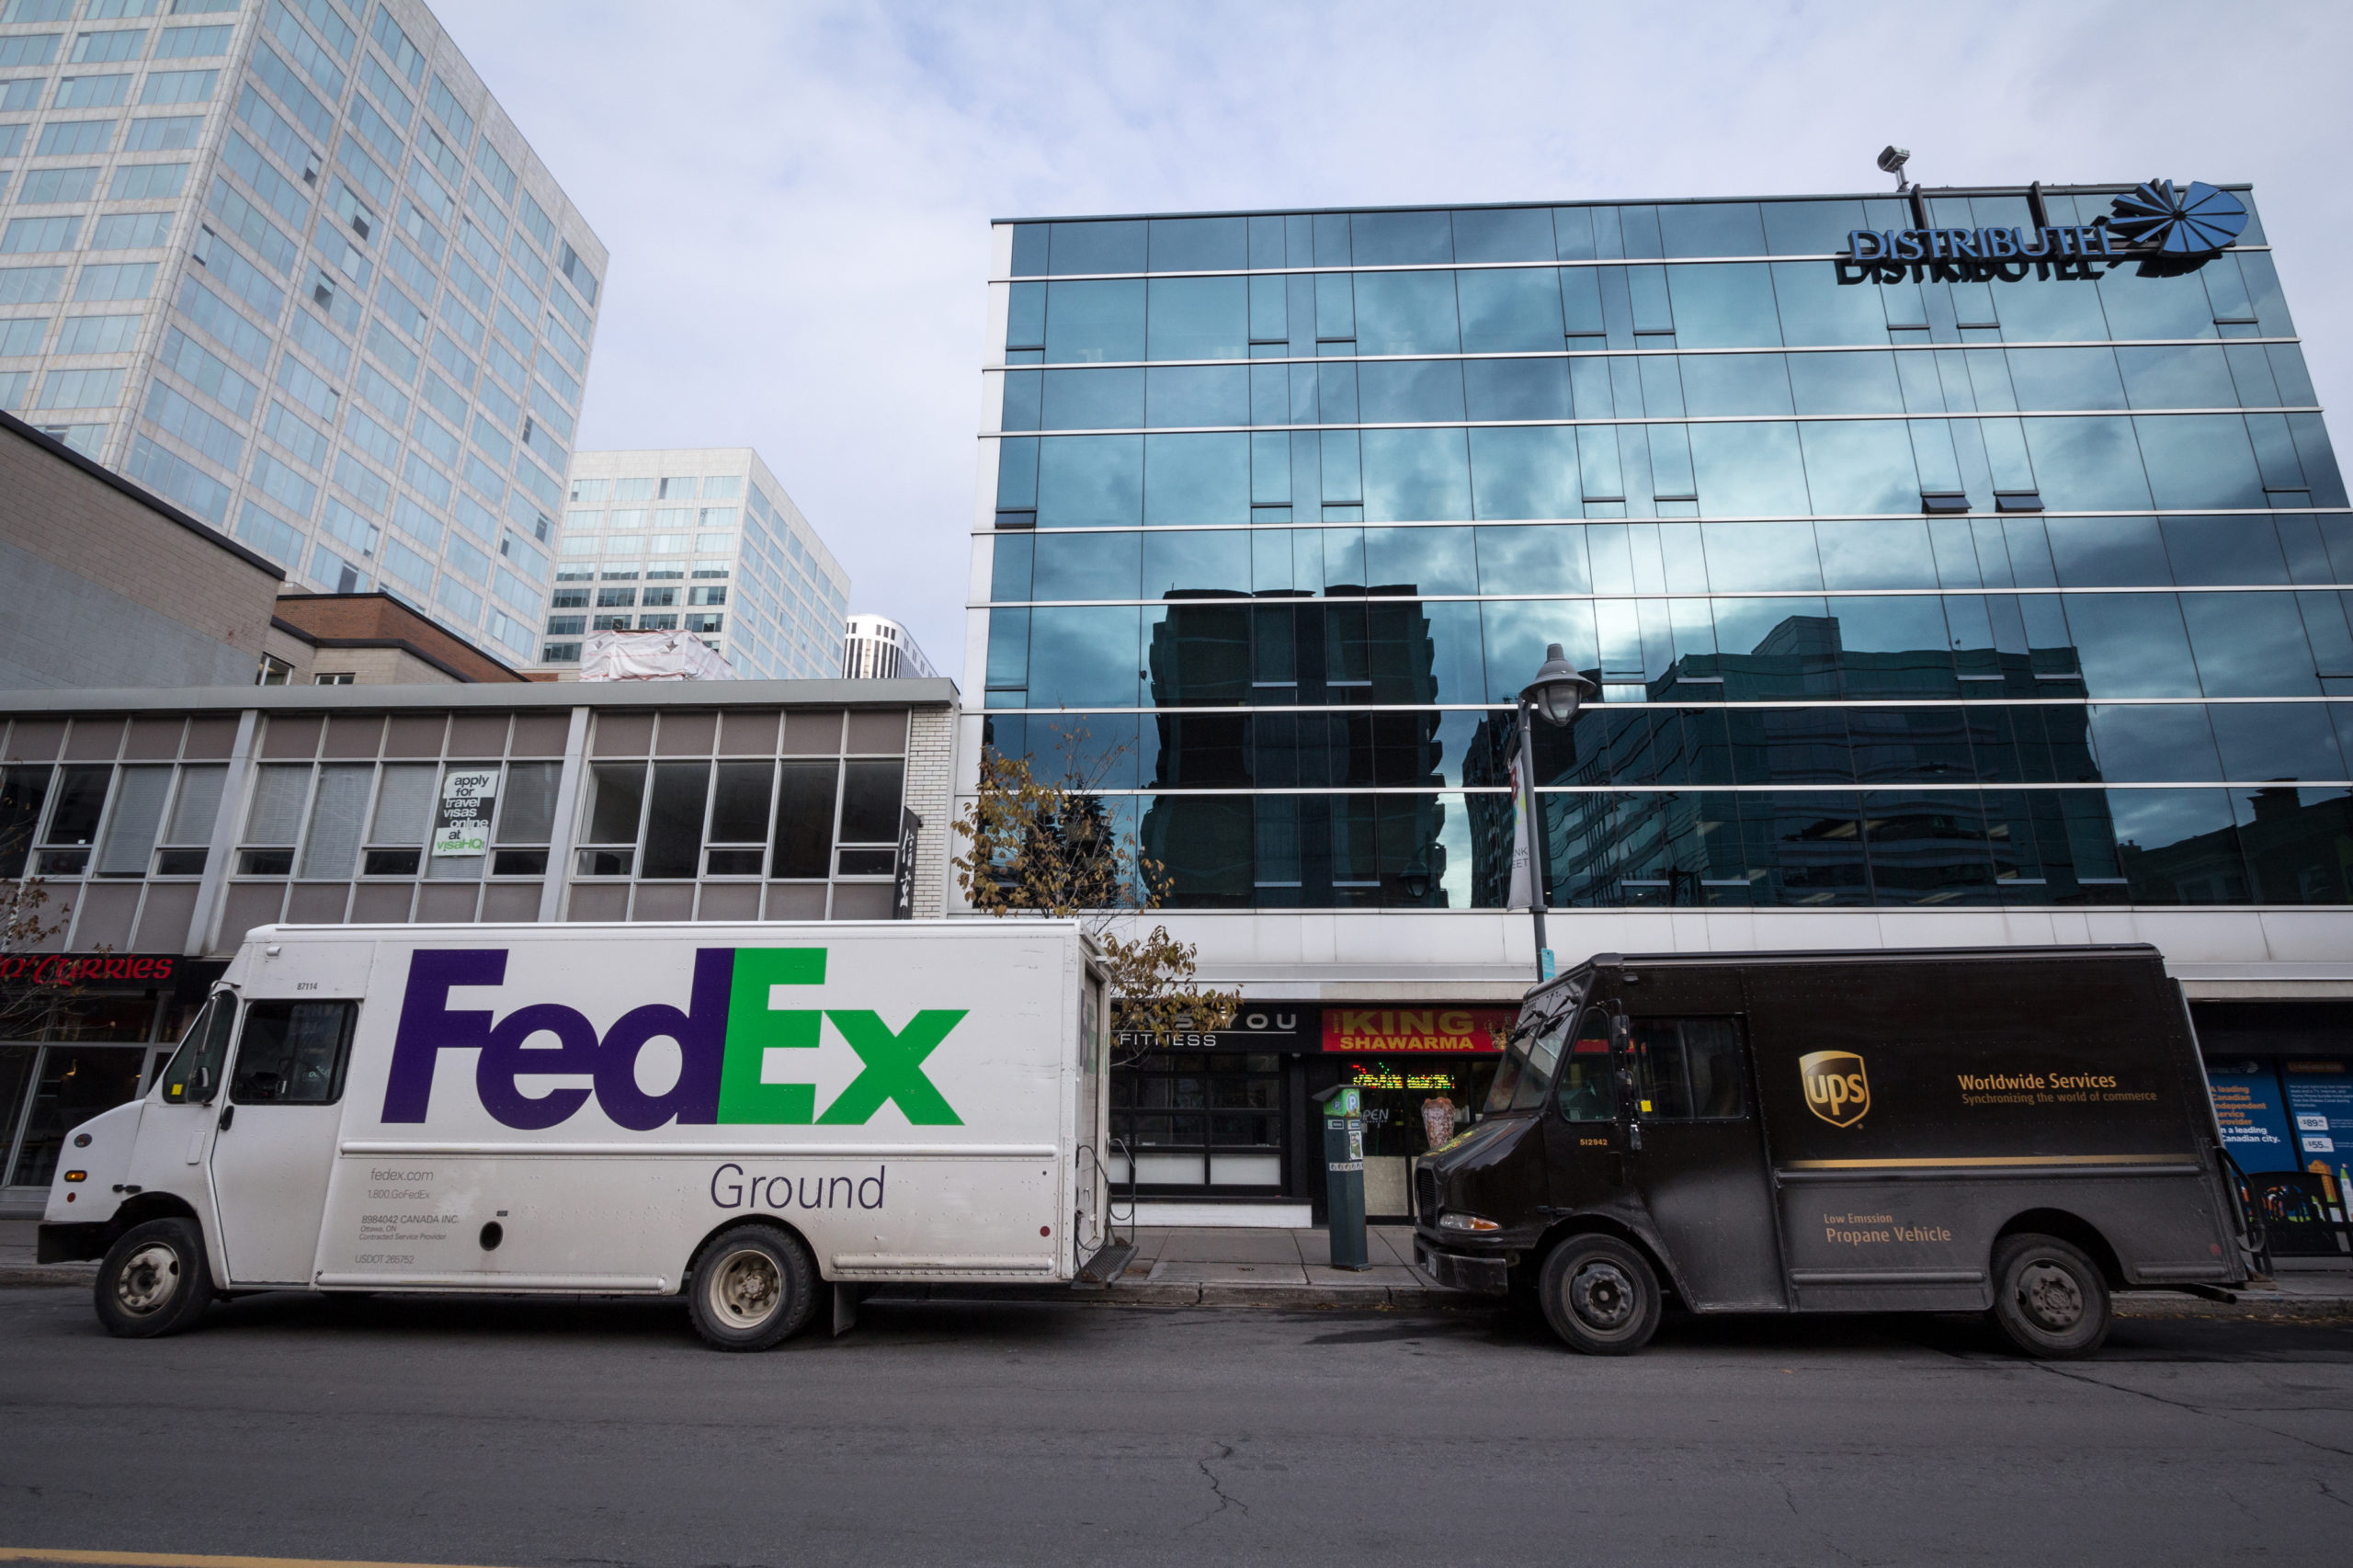 A FedEx and UPS trucks parked on the street